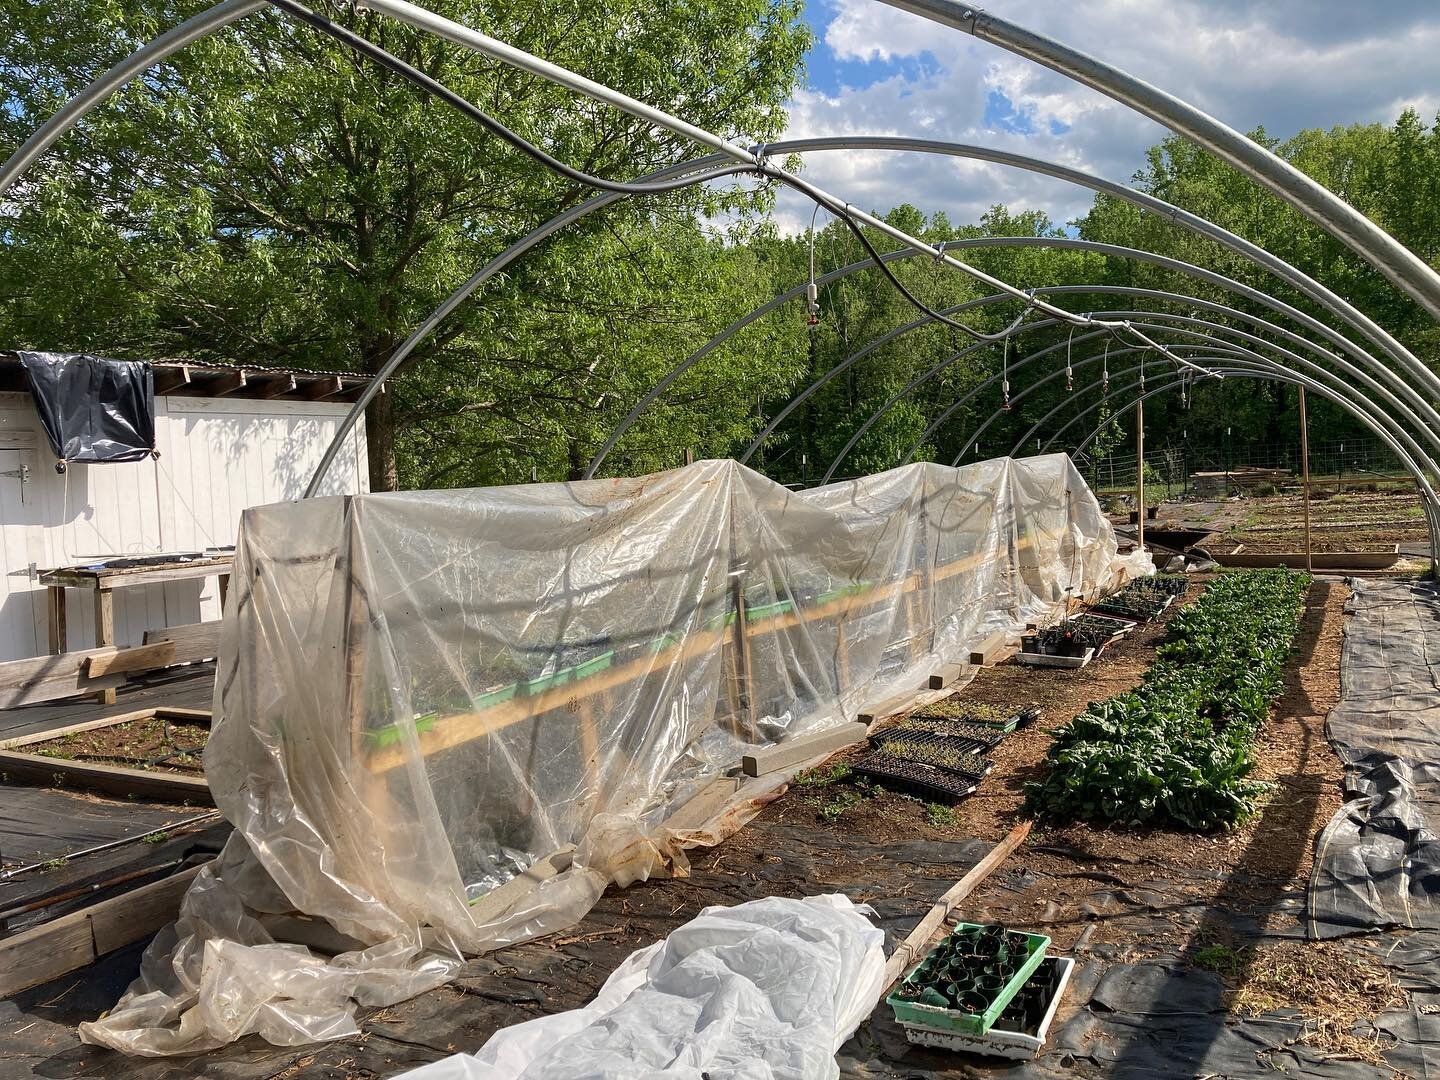 This has been a tough spring over at the CHS farm!  Wind, destruction, drought, heat, groundhogs and now near-freezing temperatures without a hoop house to protect our thousand-plus tomato and pepper seedlings!  My son and I spent some time here toda